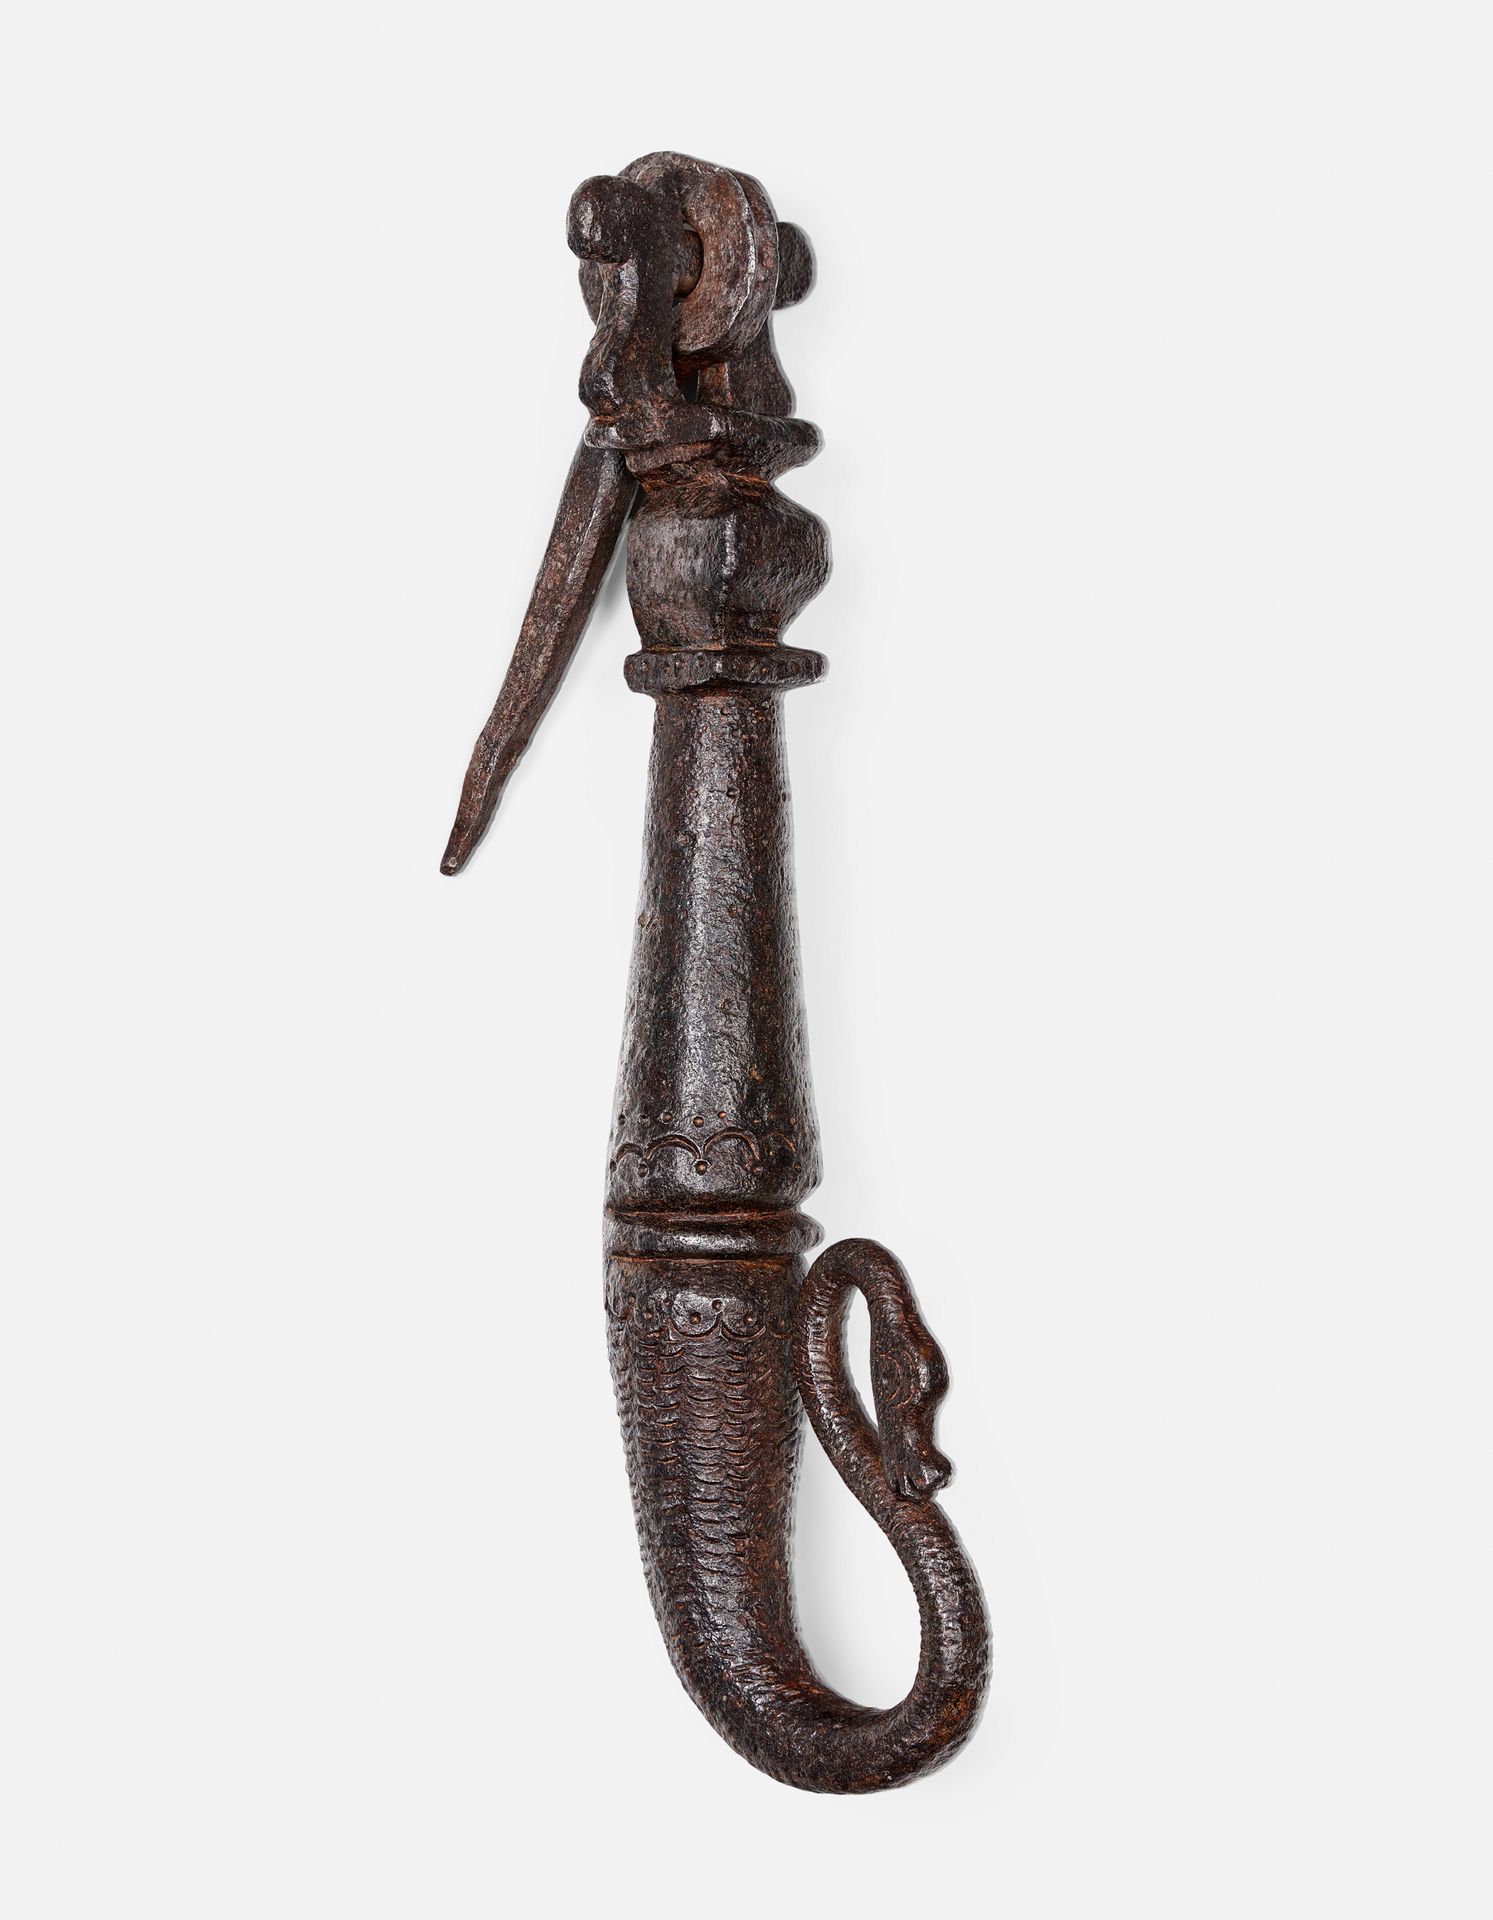 Null DOOR KNOCKER

Spain, 17th century 

Cast-iron with a snake and baluster dec&hellip;